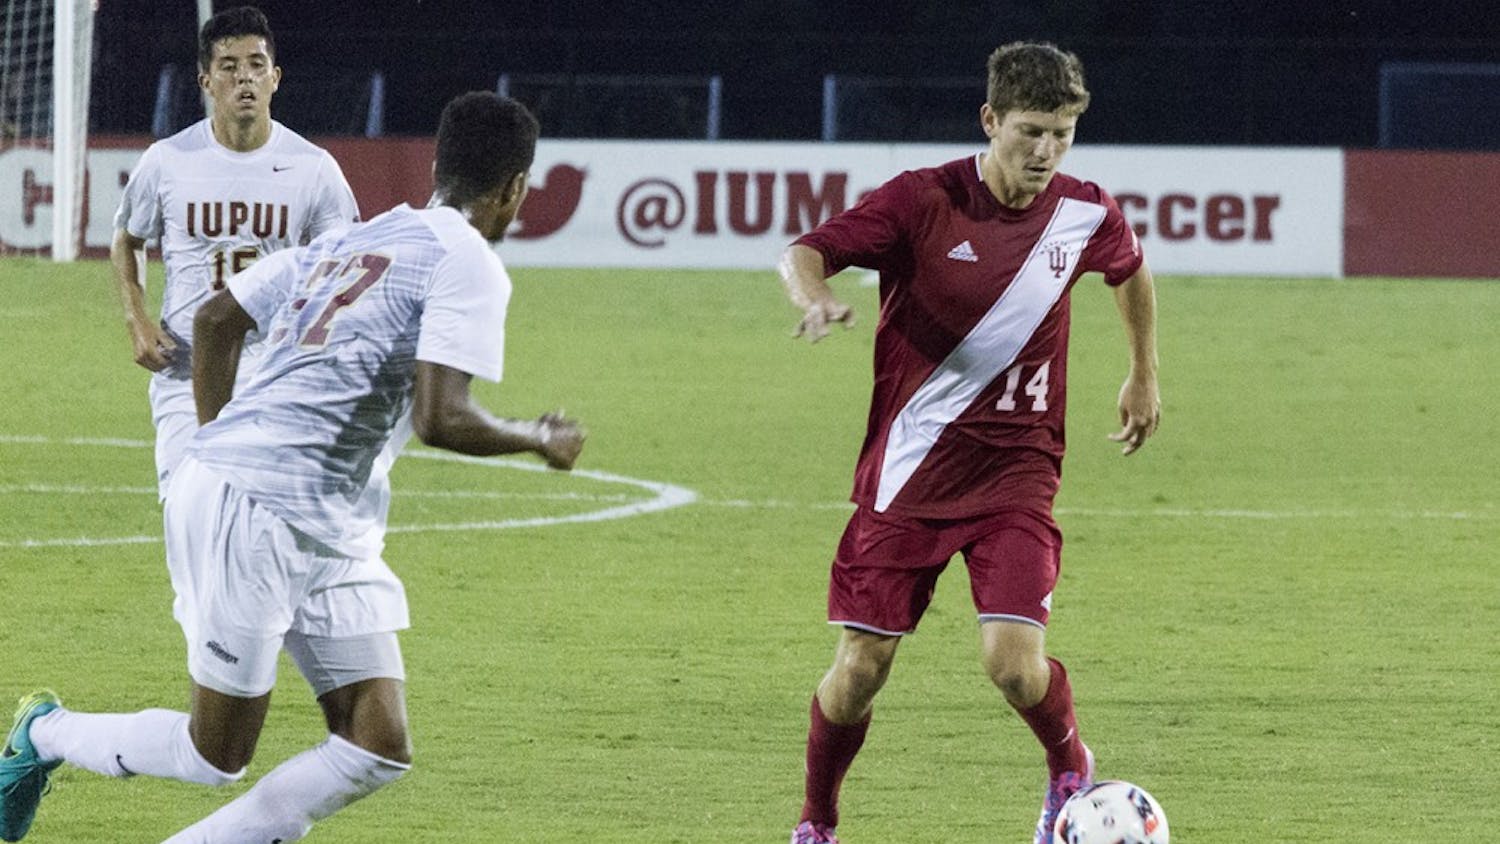 Senior defender Phil Fives dribbles the ball during Tuesday evening's 2-0 victory against IUPUI at Bill Armstrong Stadium.